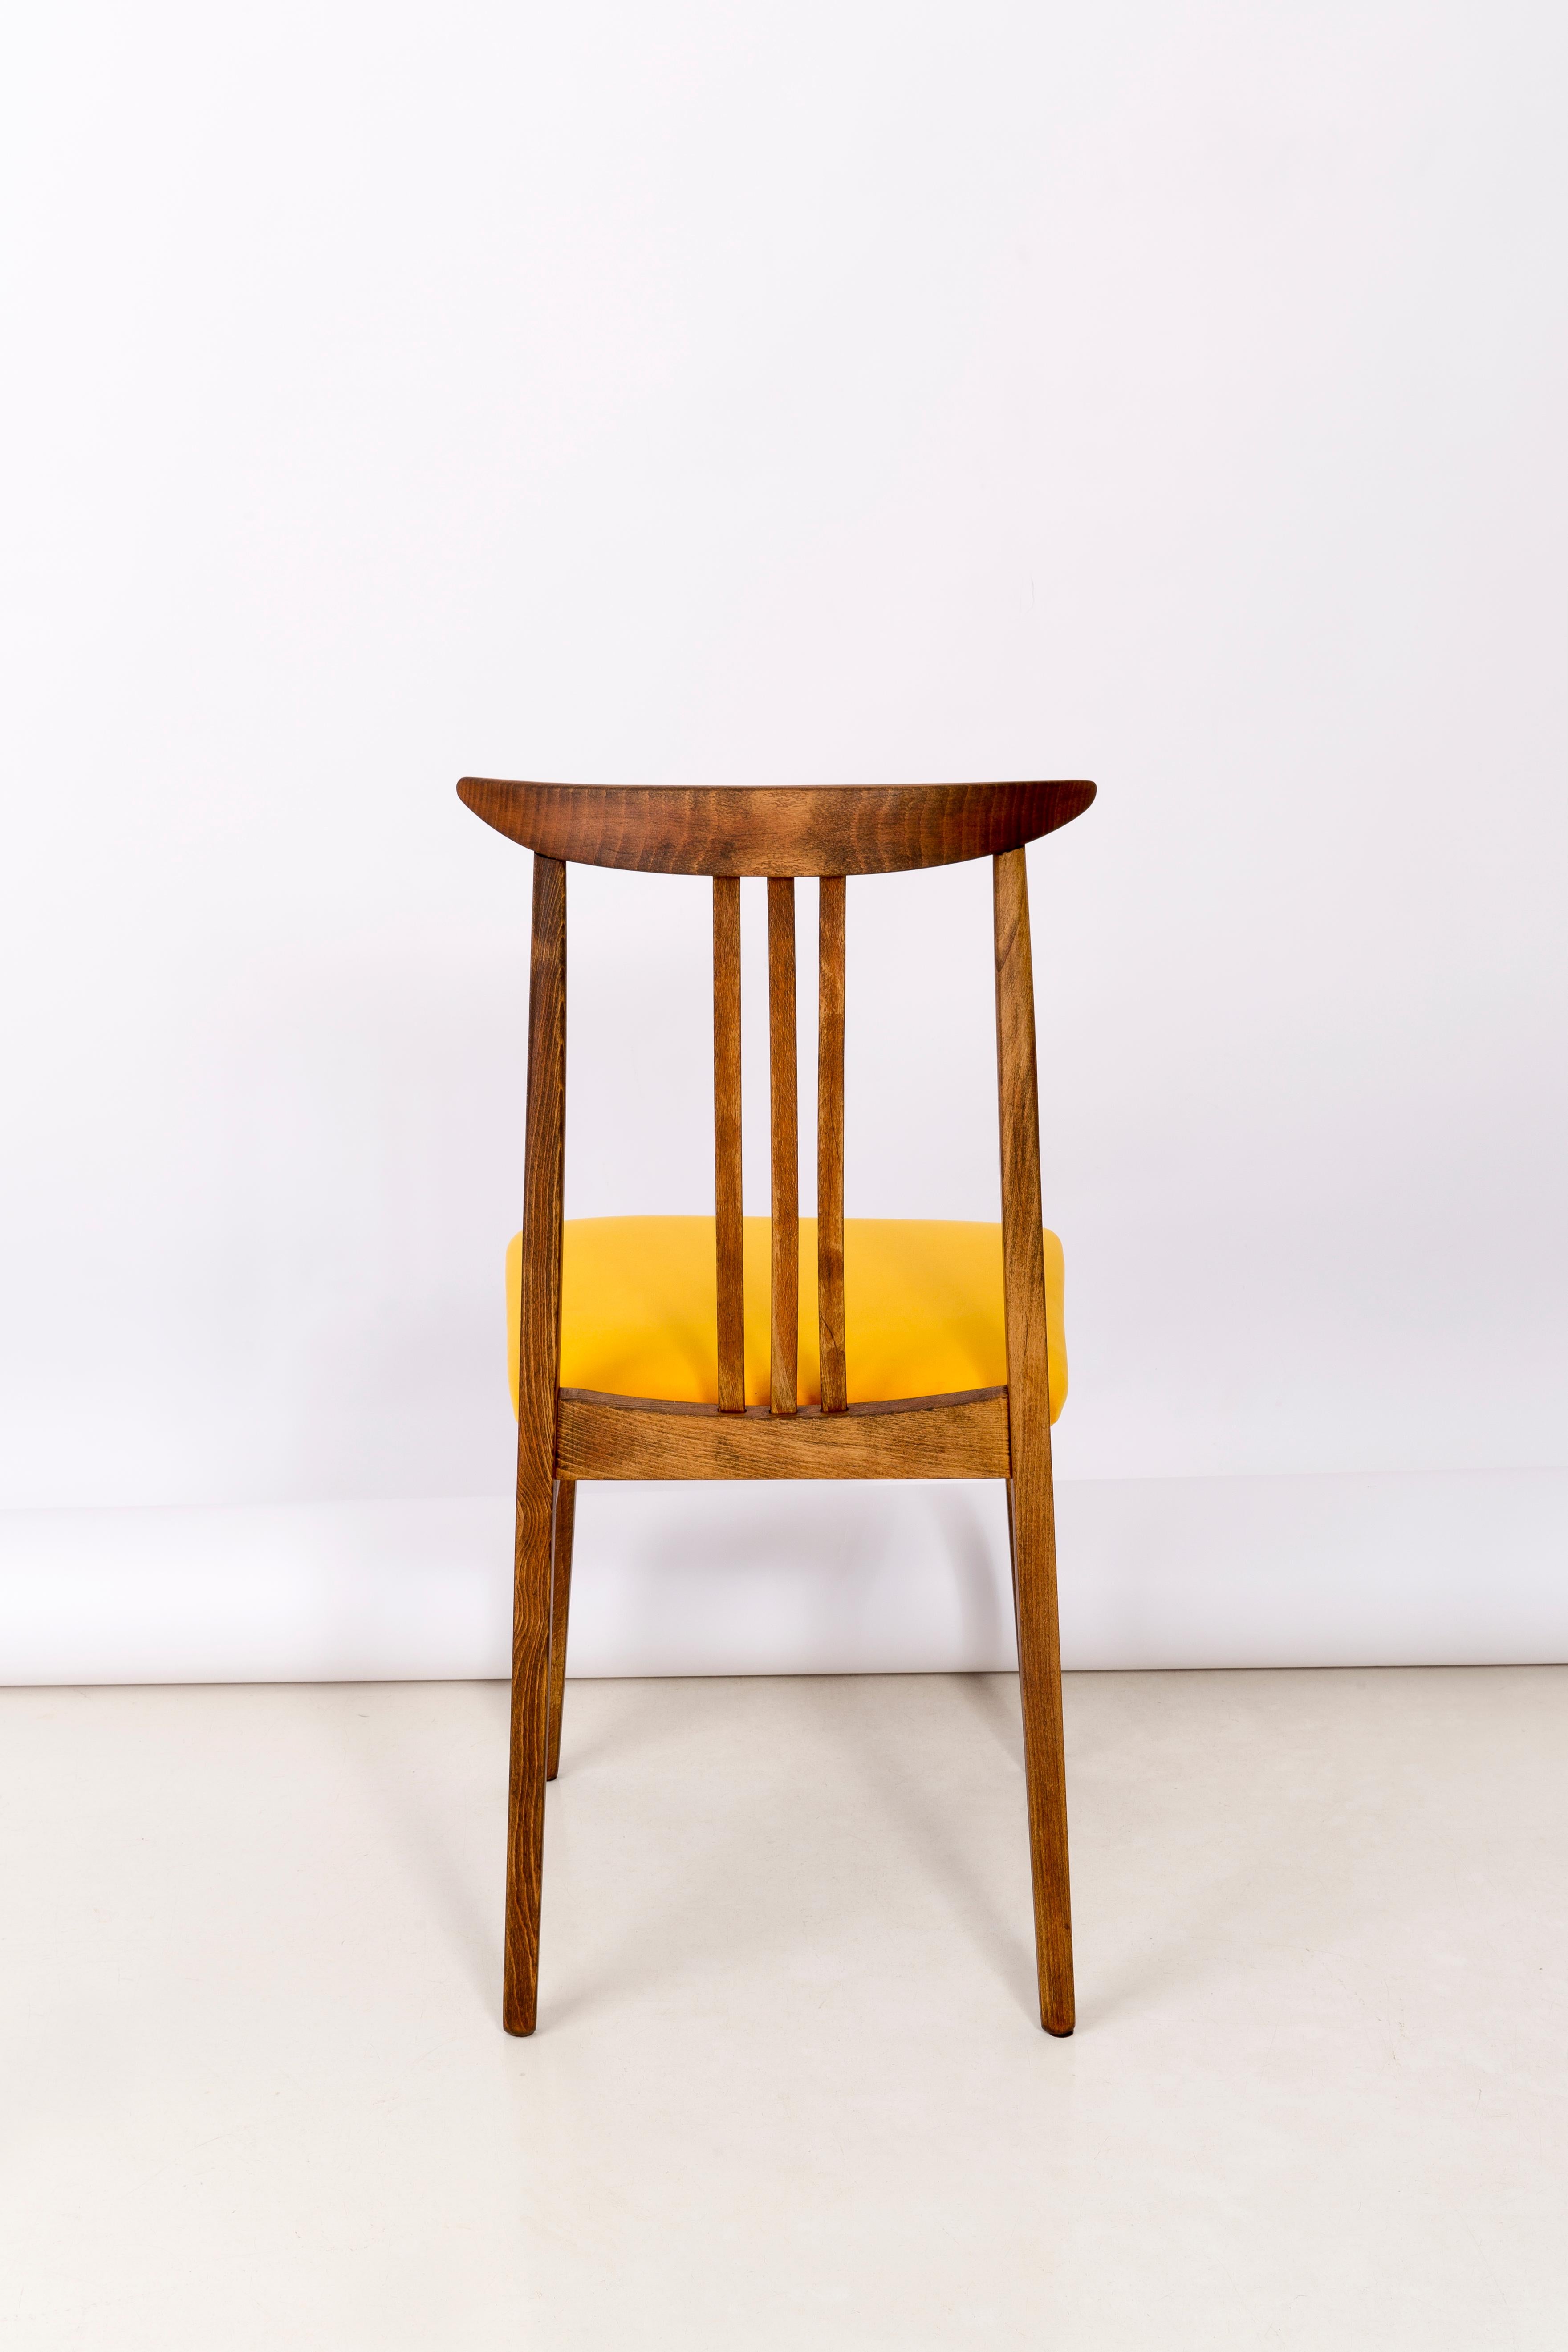 Set of Two Yellow Chairs, by Zielinski, Poland, 1960s For Sale 1